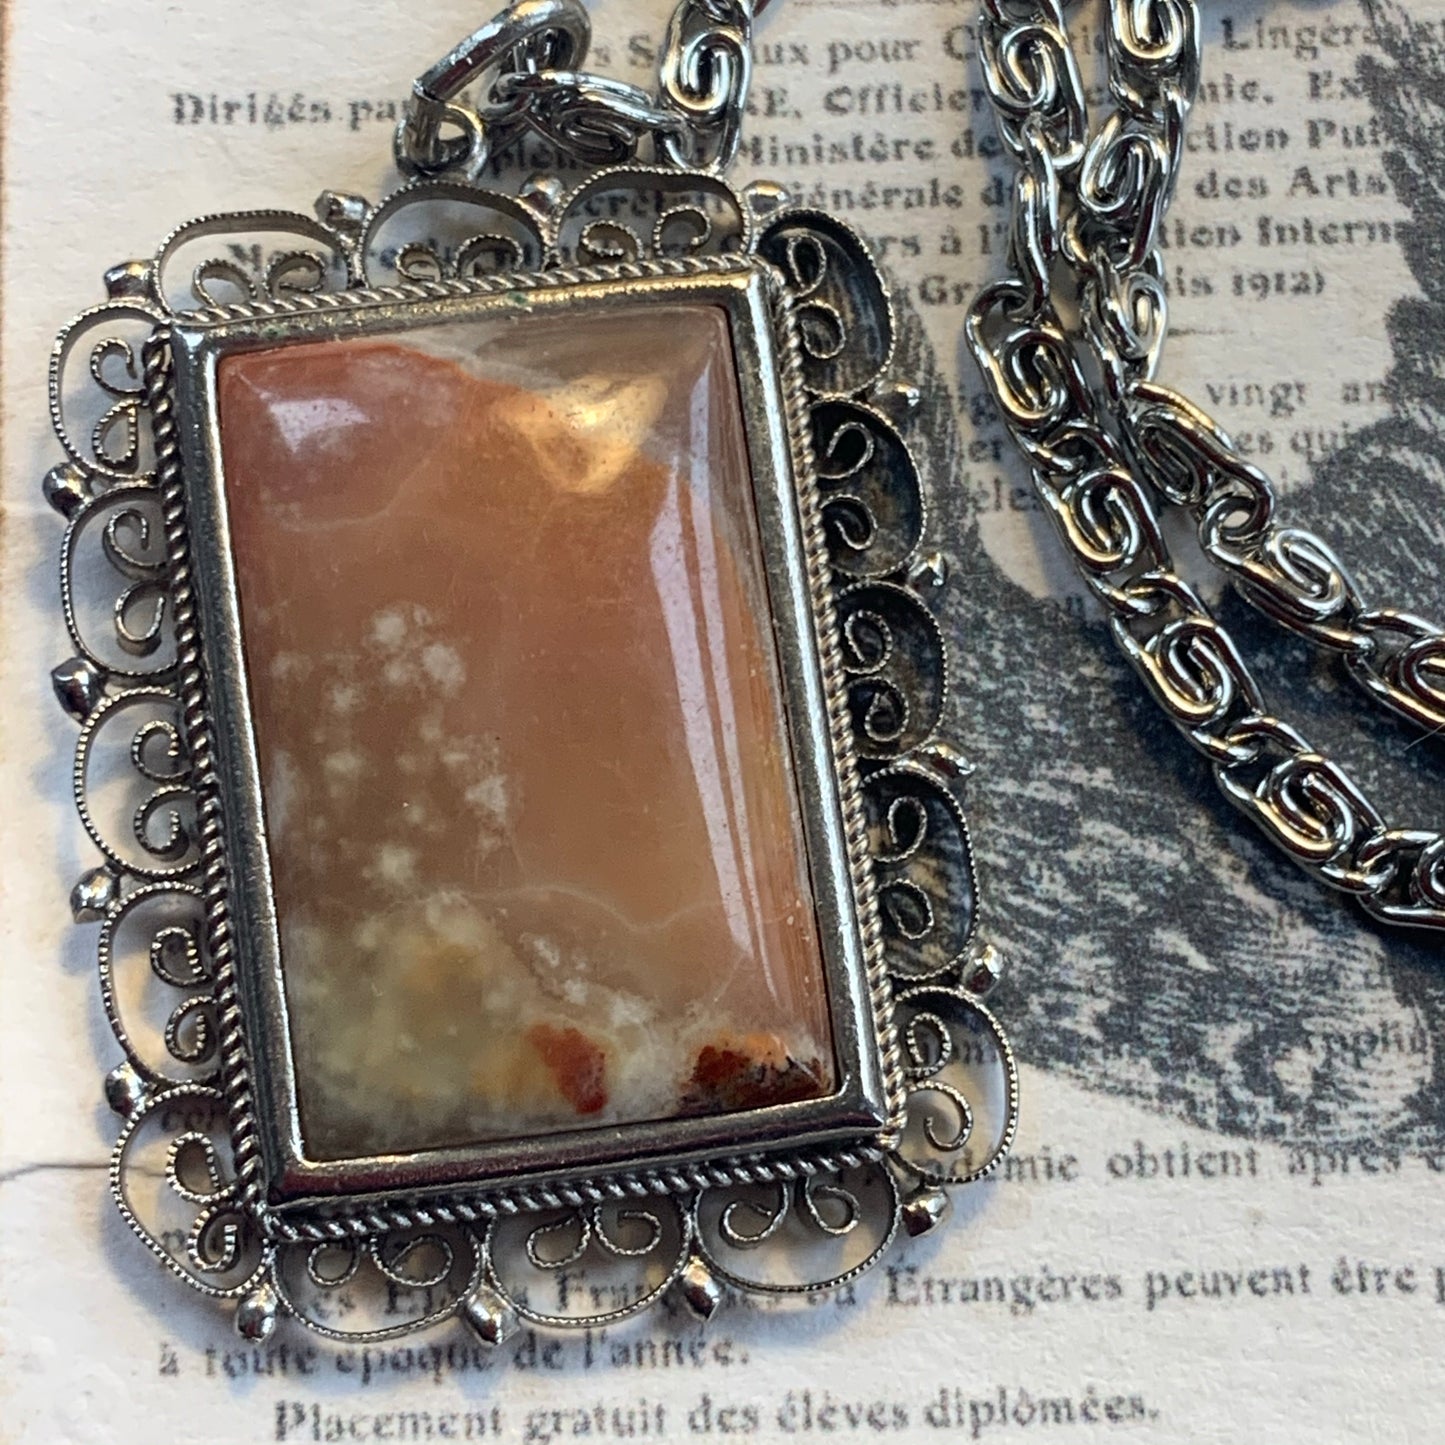 Uniquely Lady Slippers Italian Agate Pendant Necklace - Lady Slippers